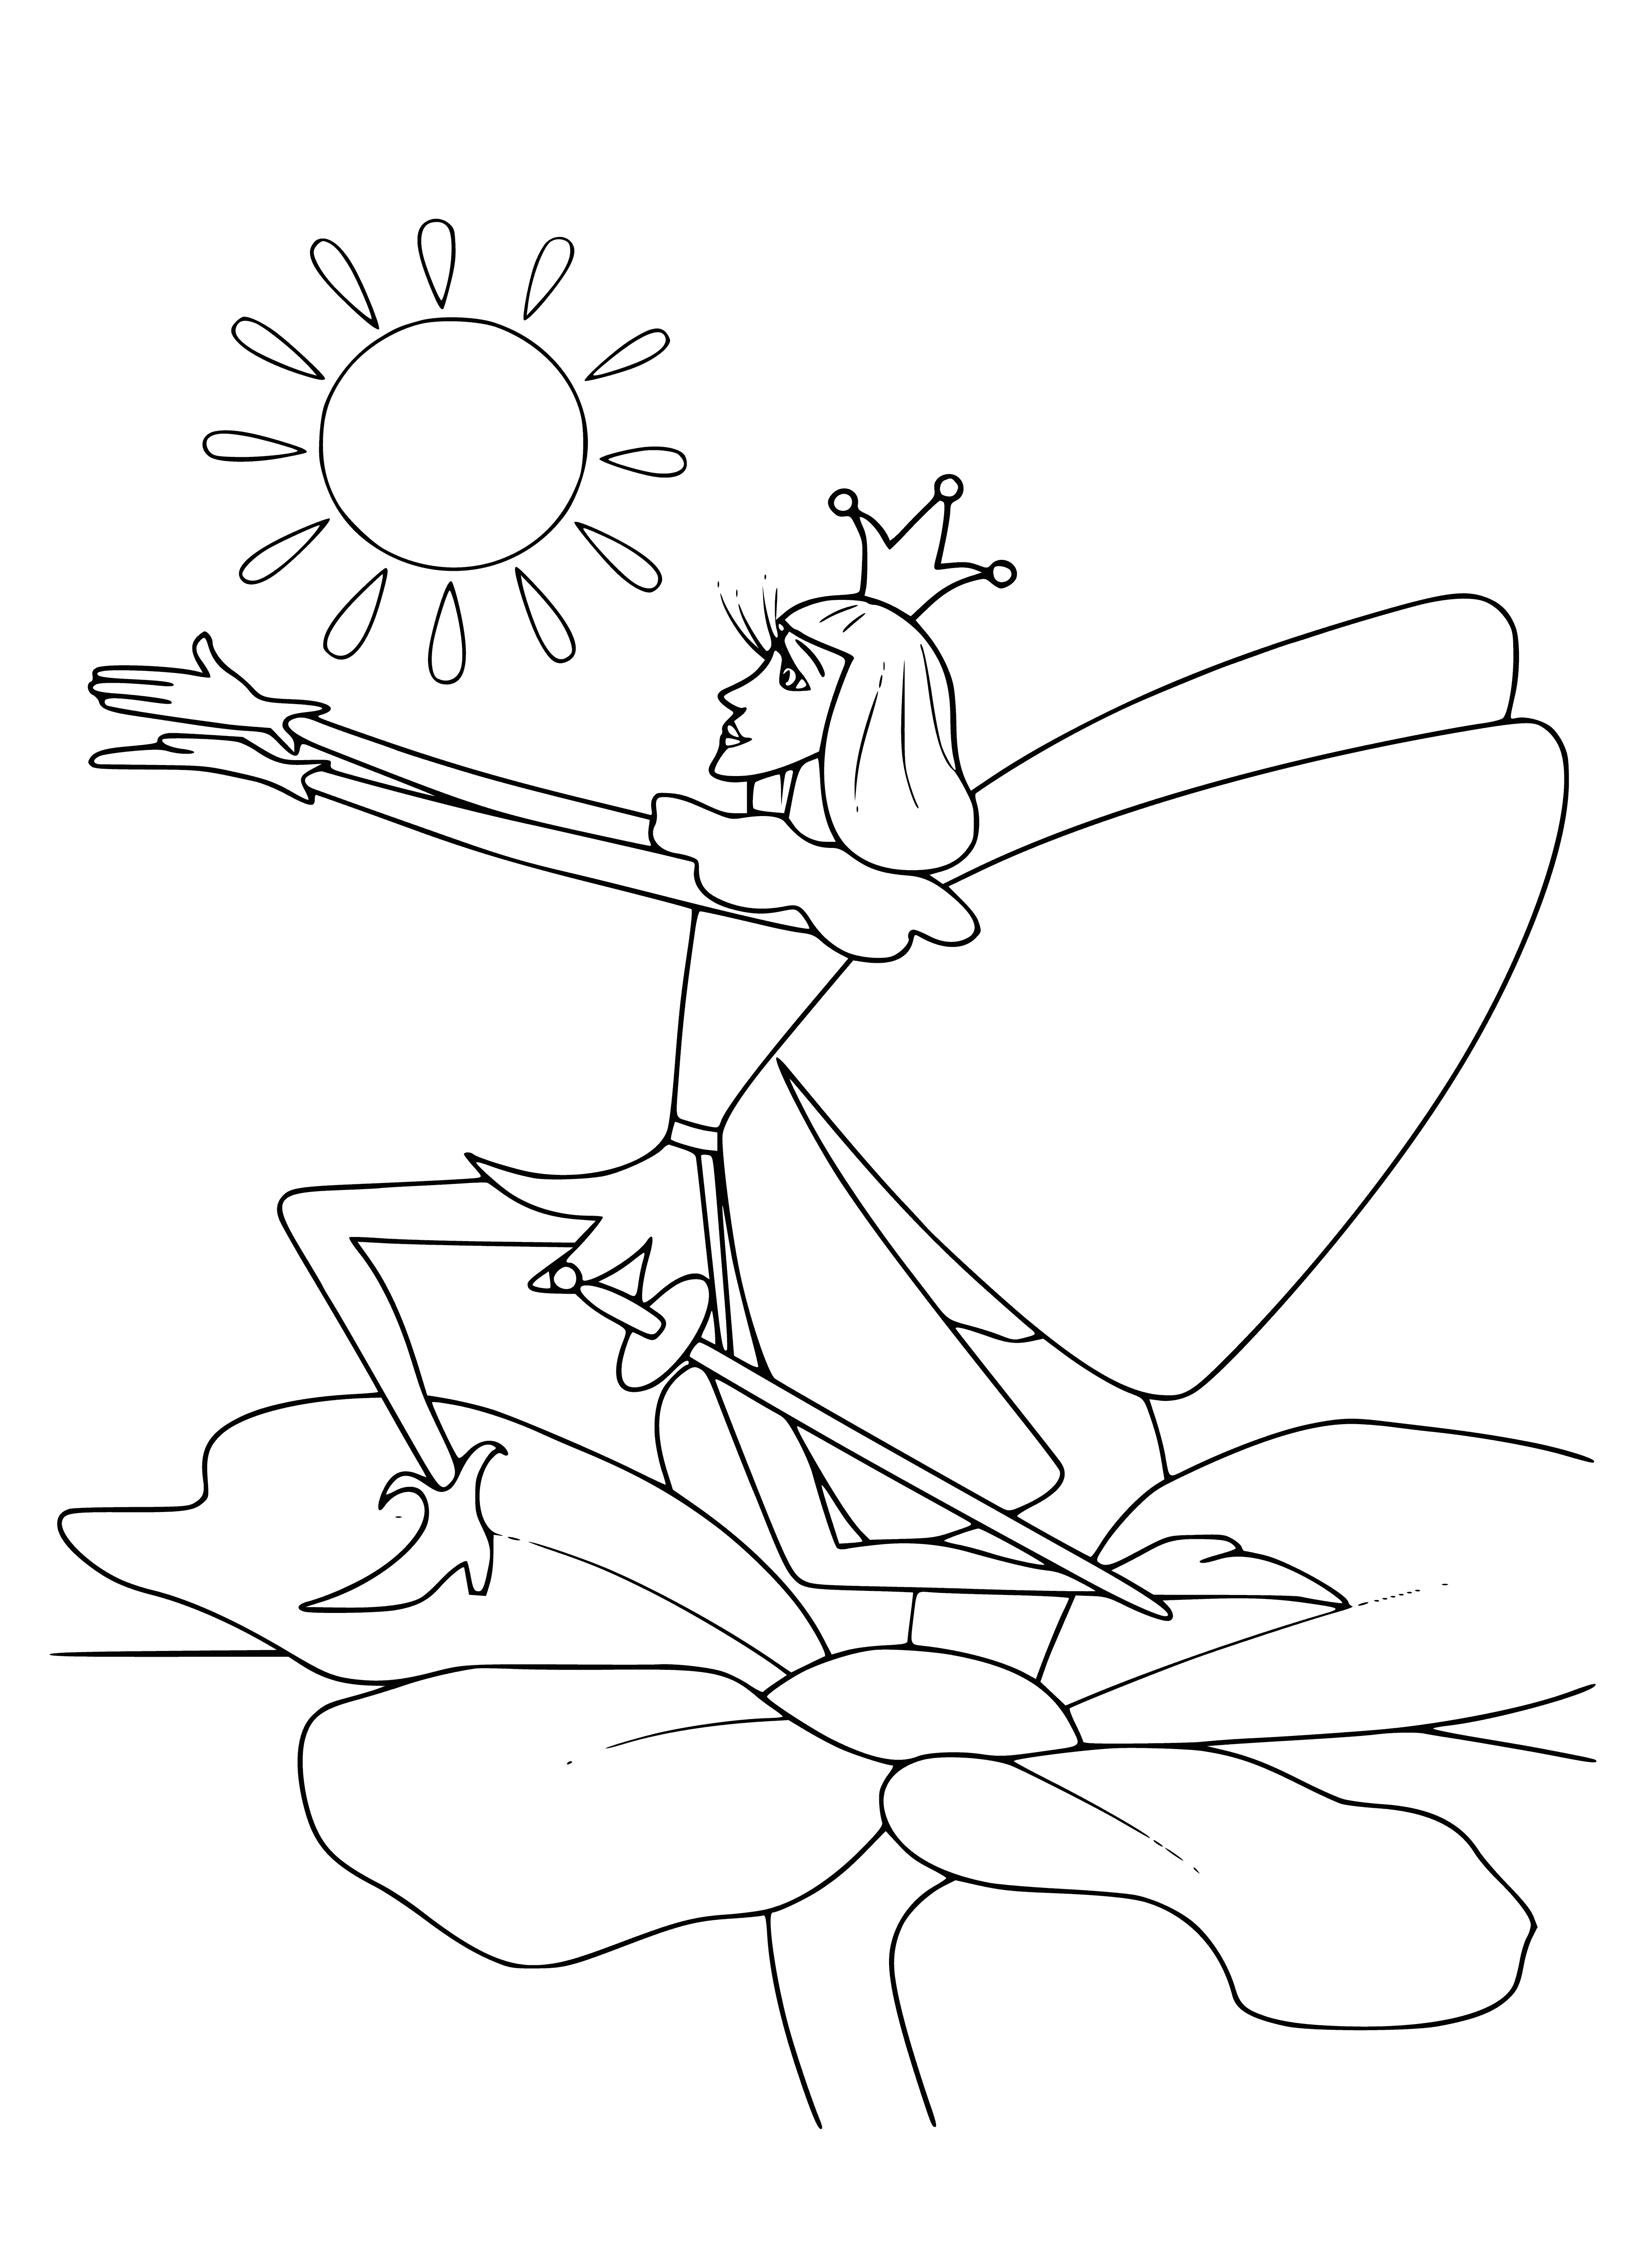 coloring page: Prince kneels and asks Thumbelina to marry him; she stands in shock with hands to face.